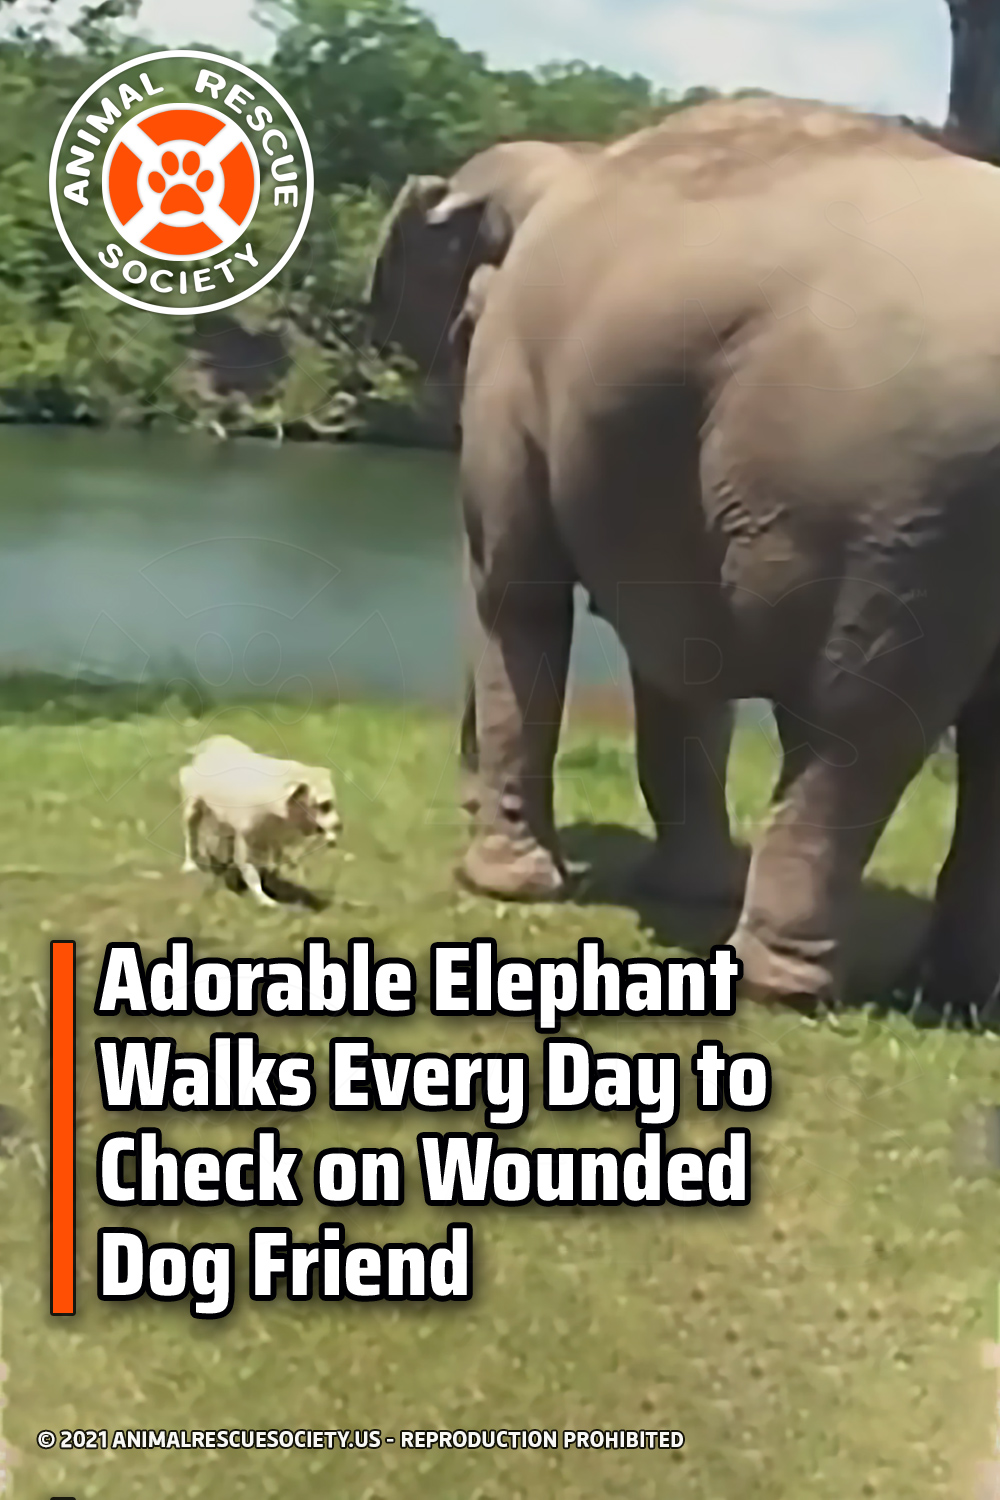 Adorable Elephant Walks Every Day to Check on Wounded Dog Friend